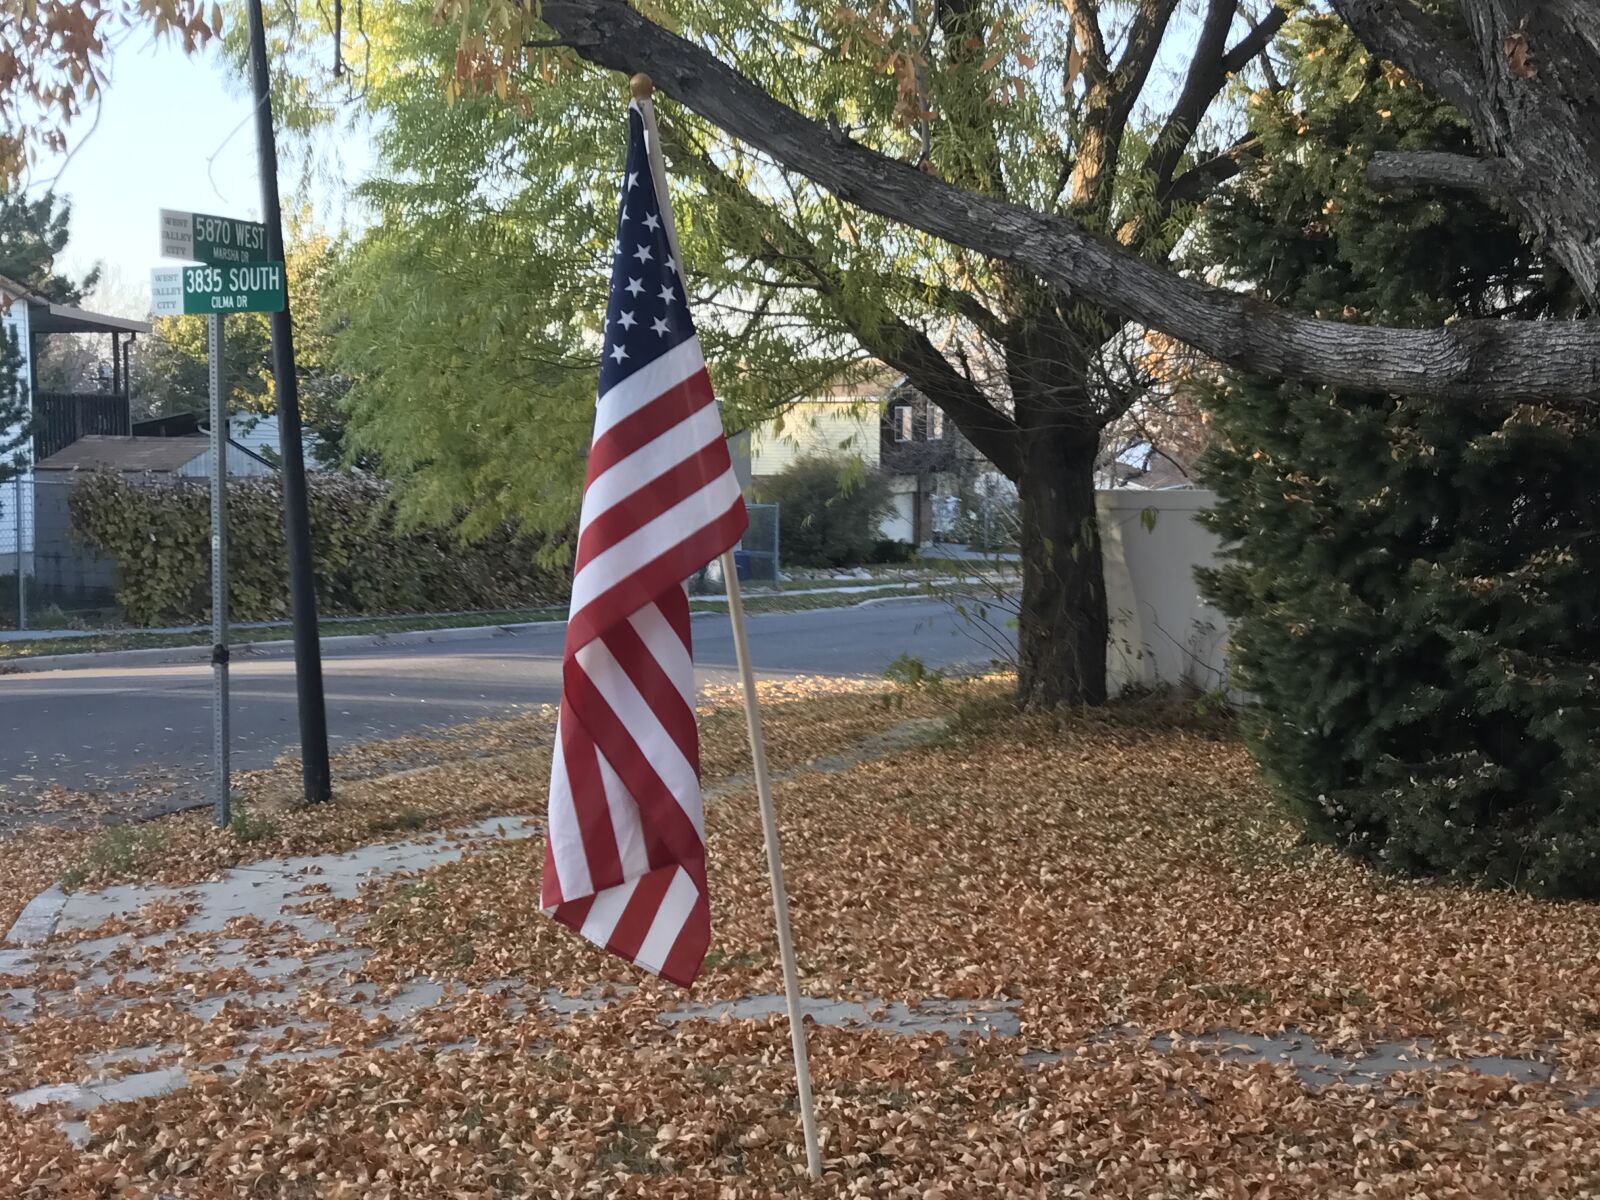 Apple iPhone 7 Plus + iPhone 7 Plus back iSight Duo camera 3.99mm f/1.8 sample photo. American, flag, fall photography